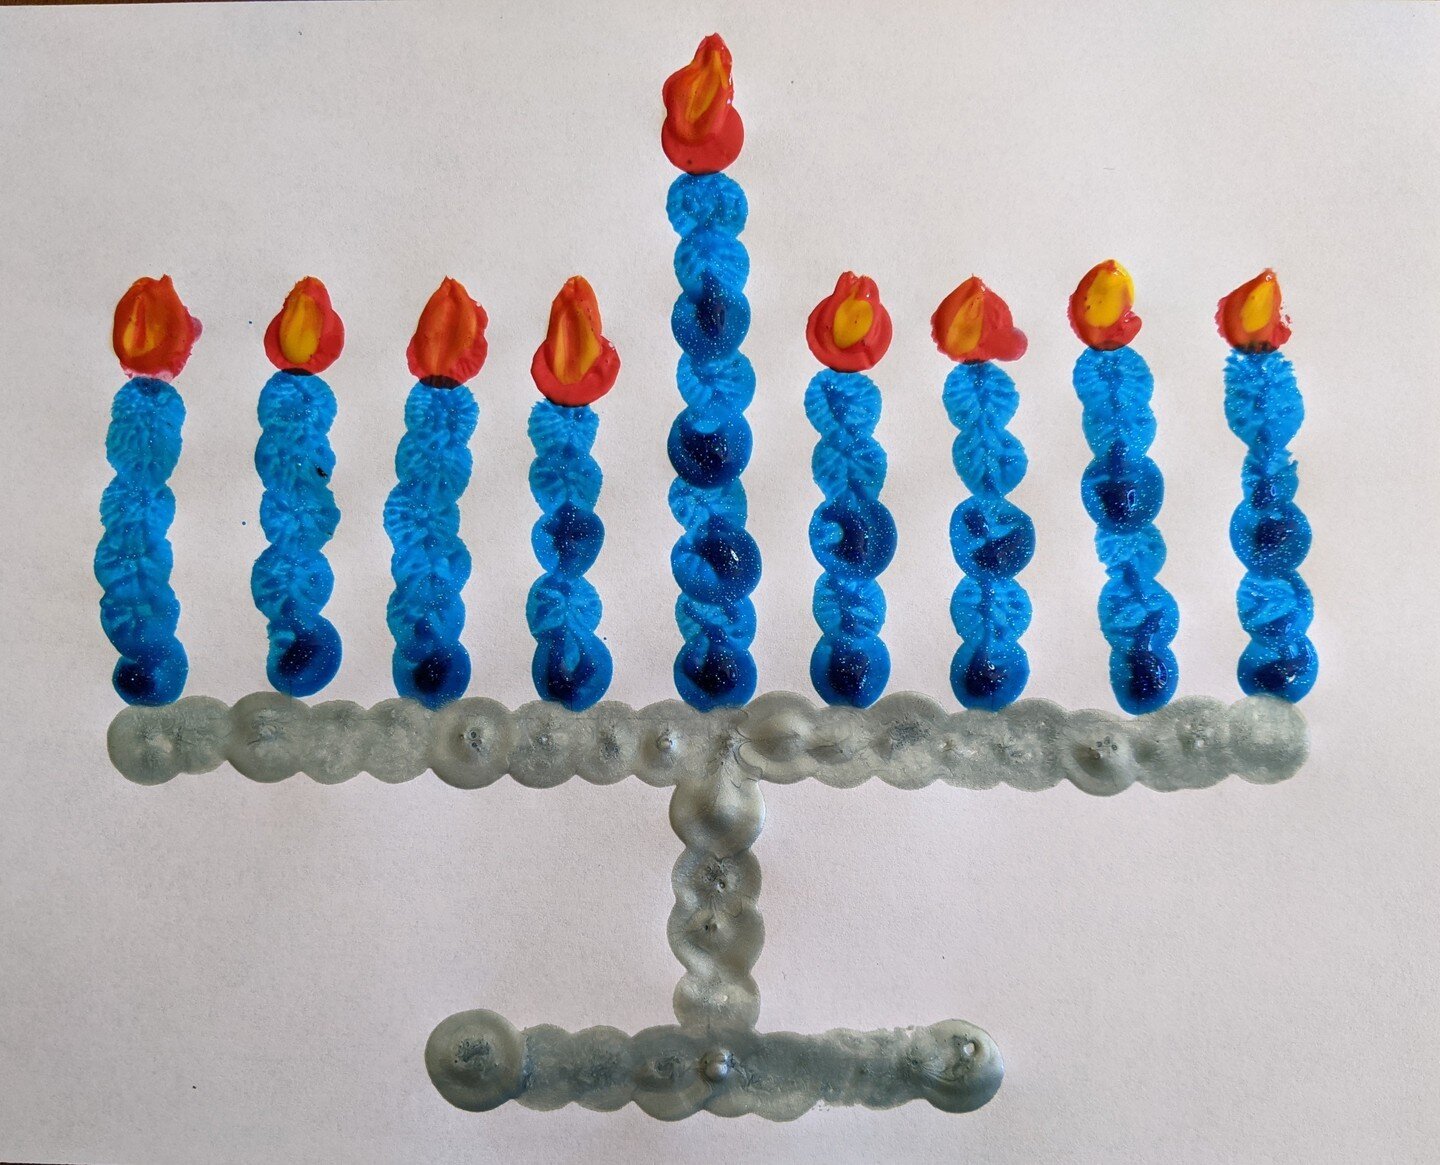 Happy Hanukkah from Start the Art!
May your candles burn bright this season.